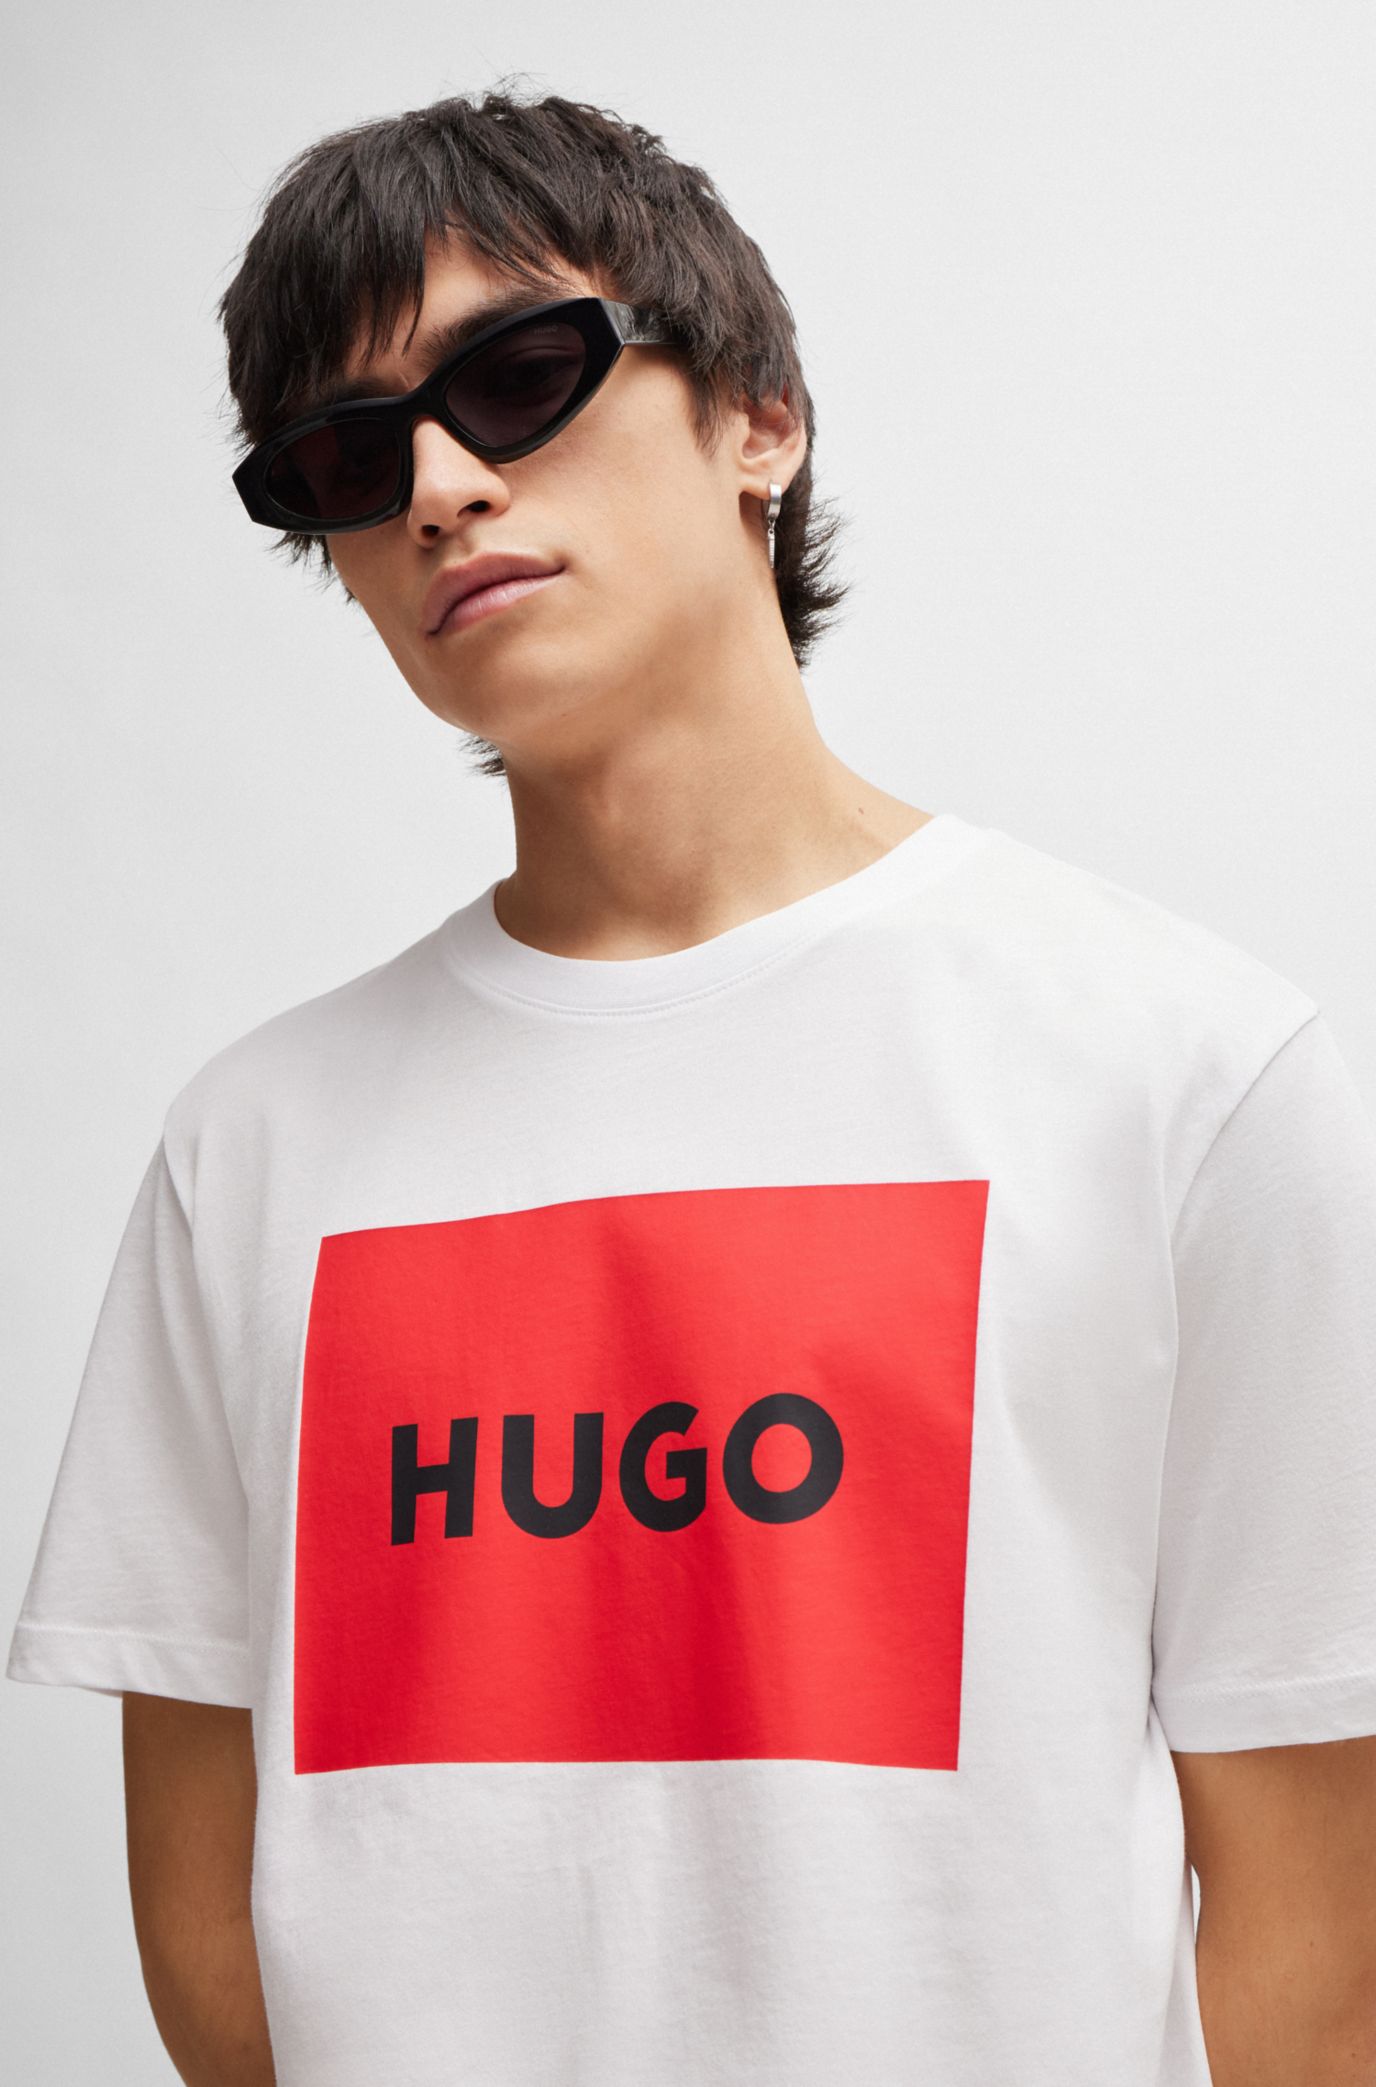 HUGO - Crew-neck T-shirt in jersey with box logo cotton